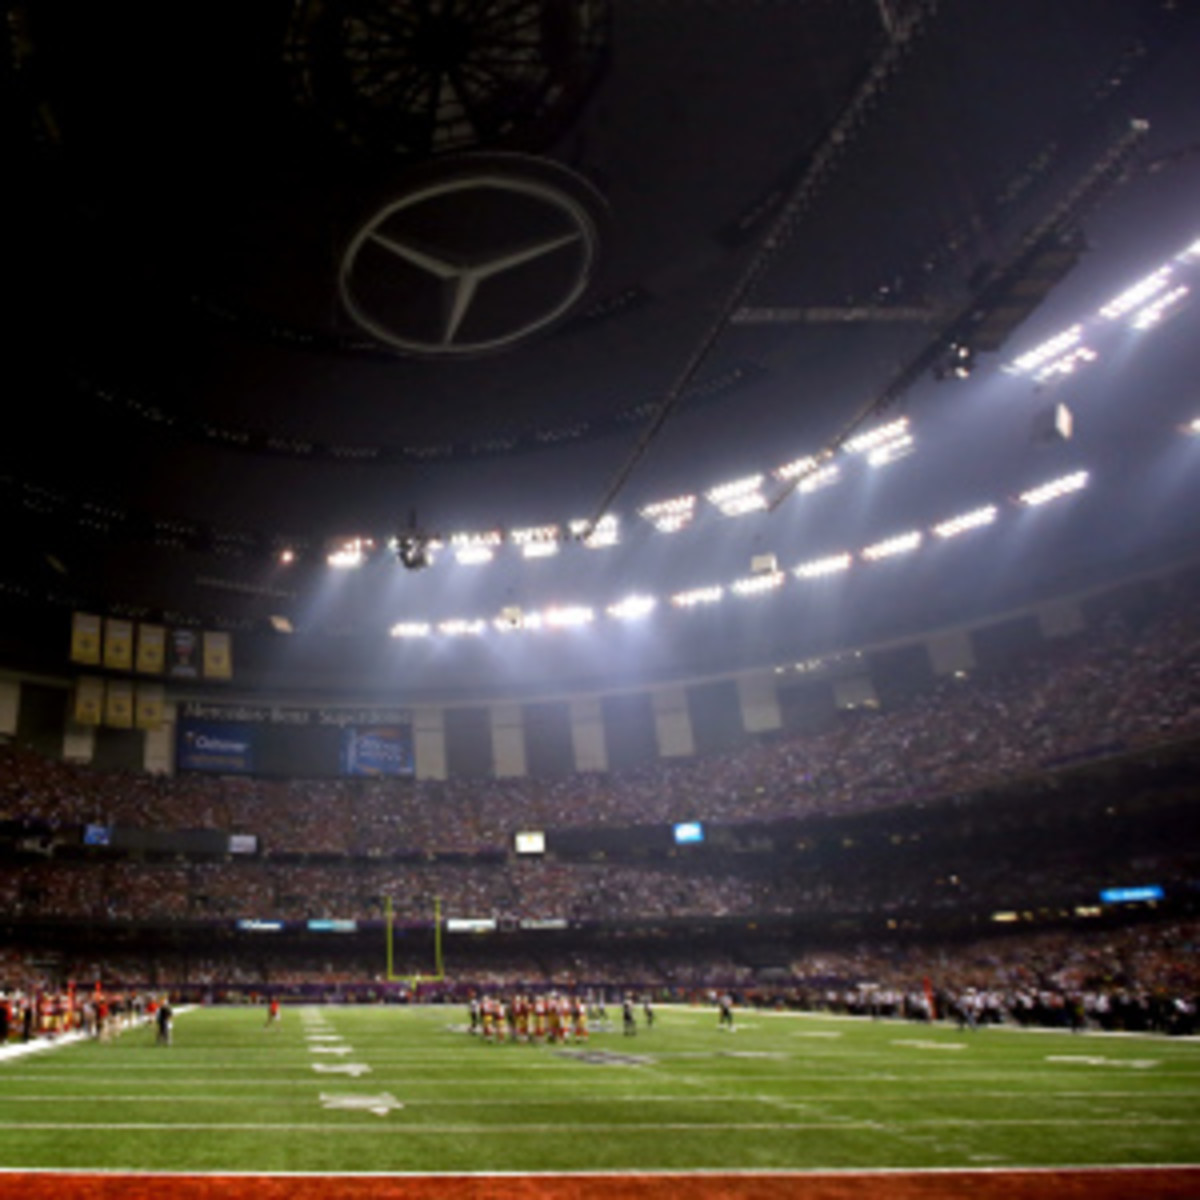 The issues caused by the Super Bowl blackout could pale in comparison to posting next year's Super Bowl because of weather conditions. (Al Bello/Getty Images)